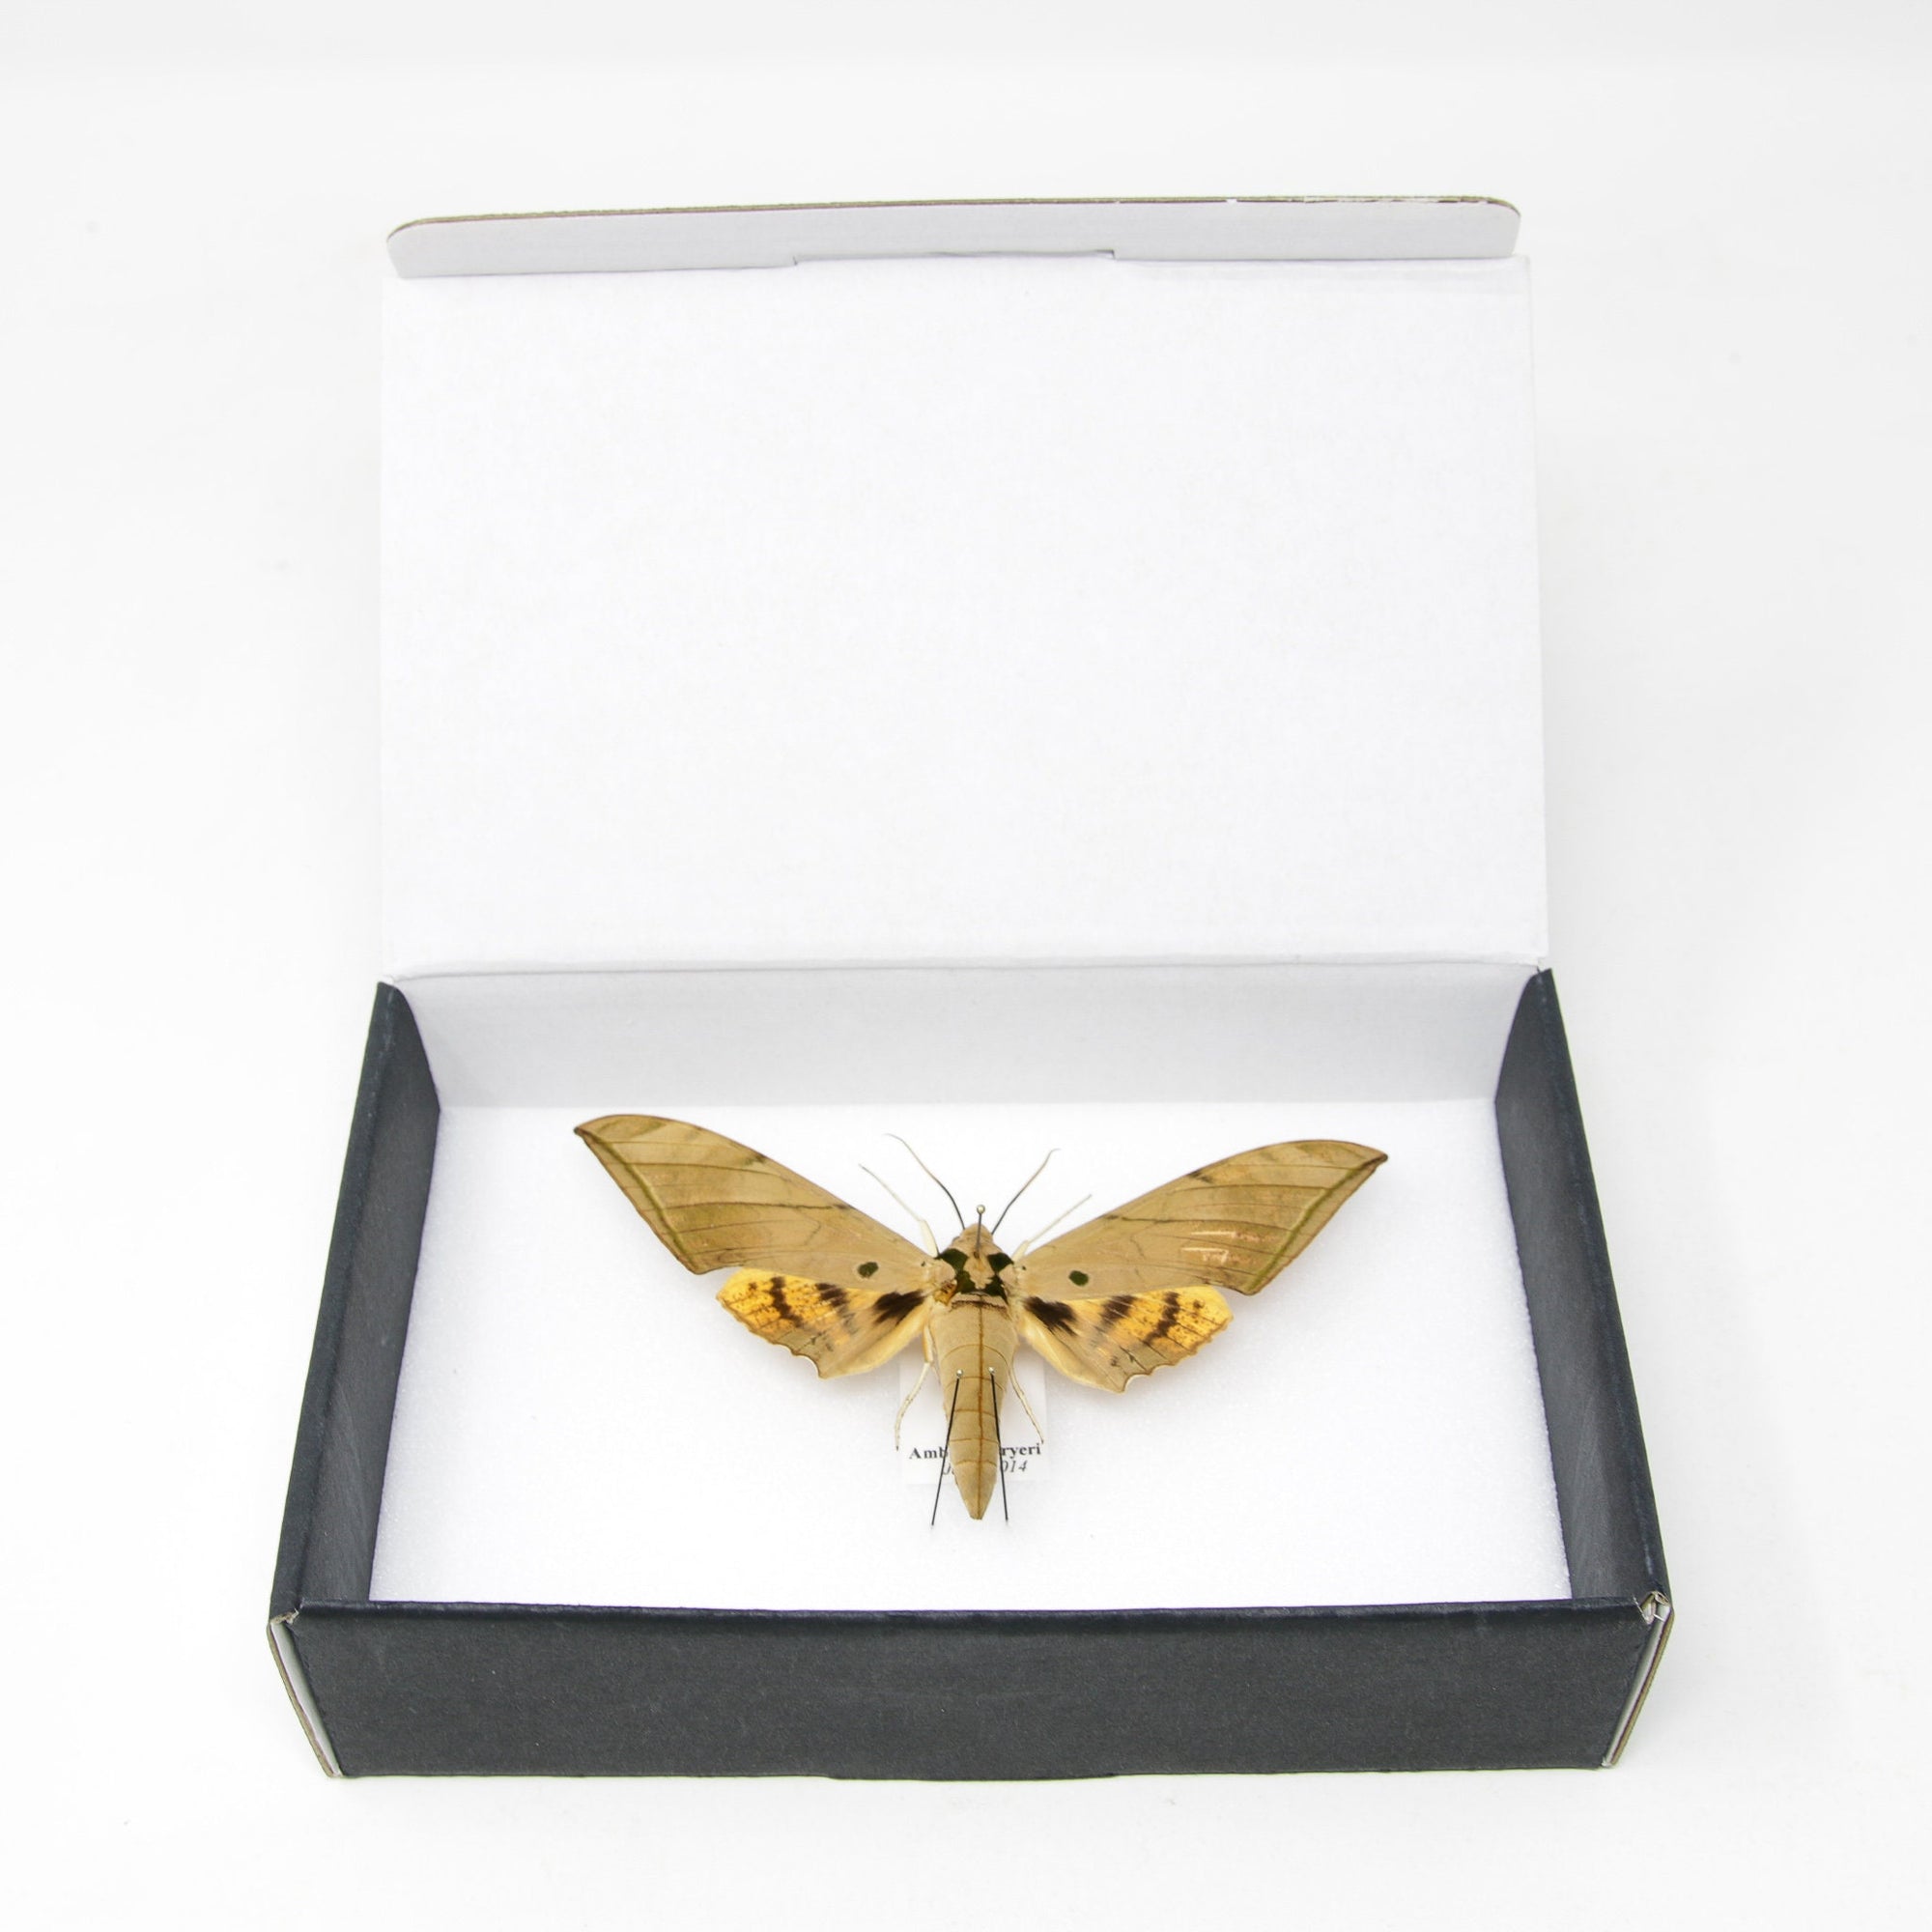 Sabah Sphinx Hawkmoth | Ambulyx pryeri | Pinned Lepidoptera with Scientific Collection Data A1-